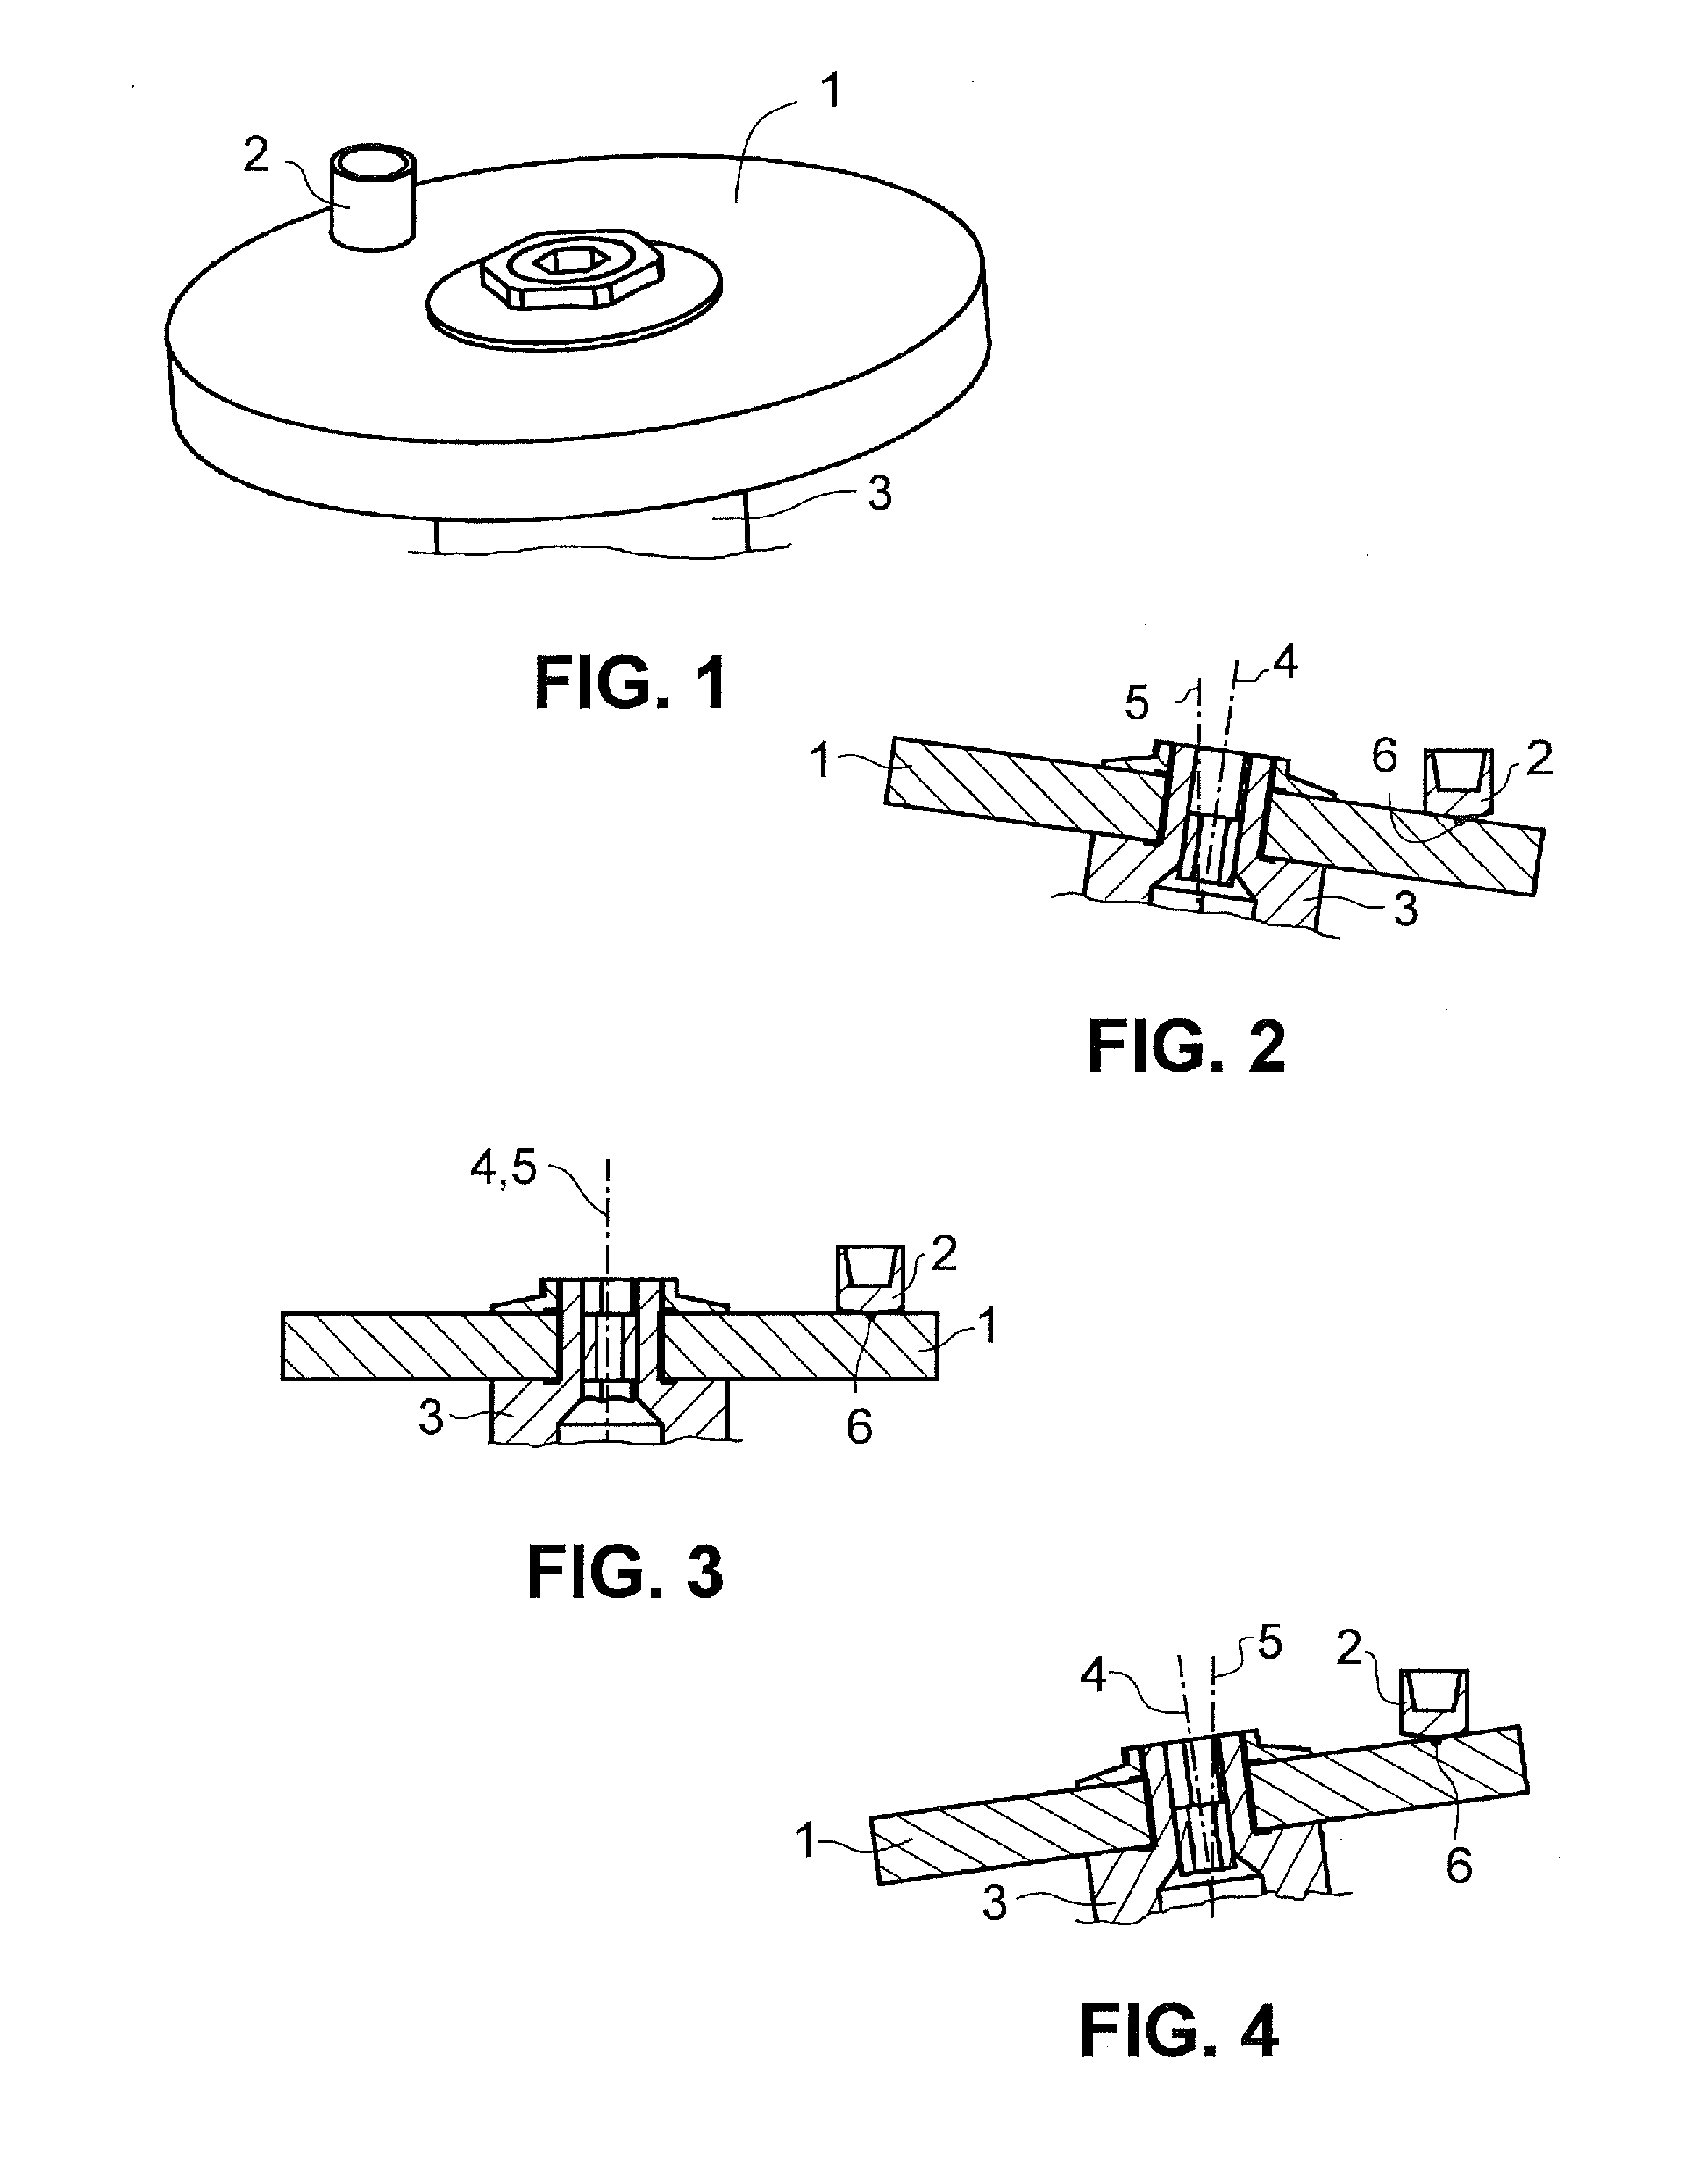 Device and method for grinding workpieces using a control unit